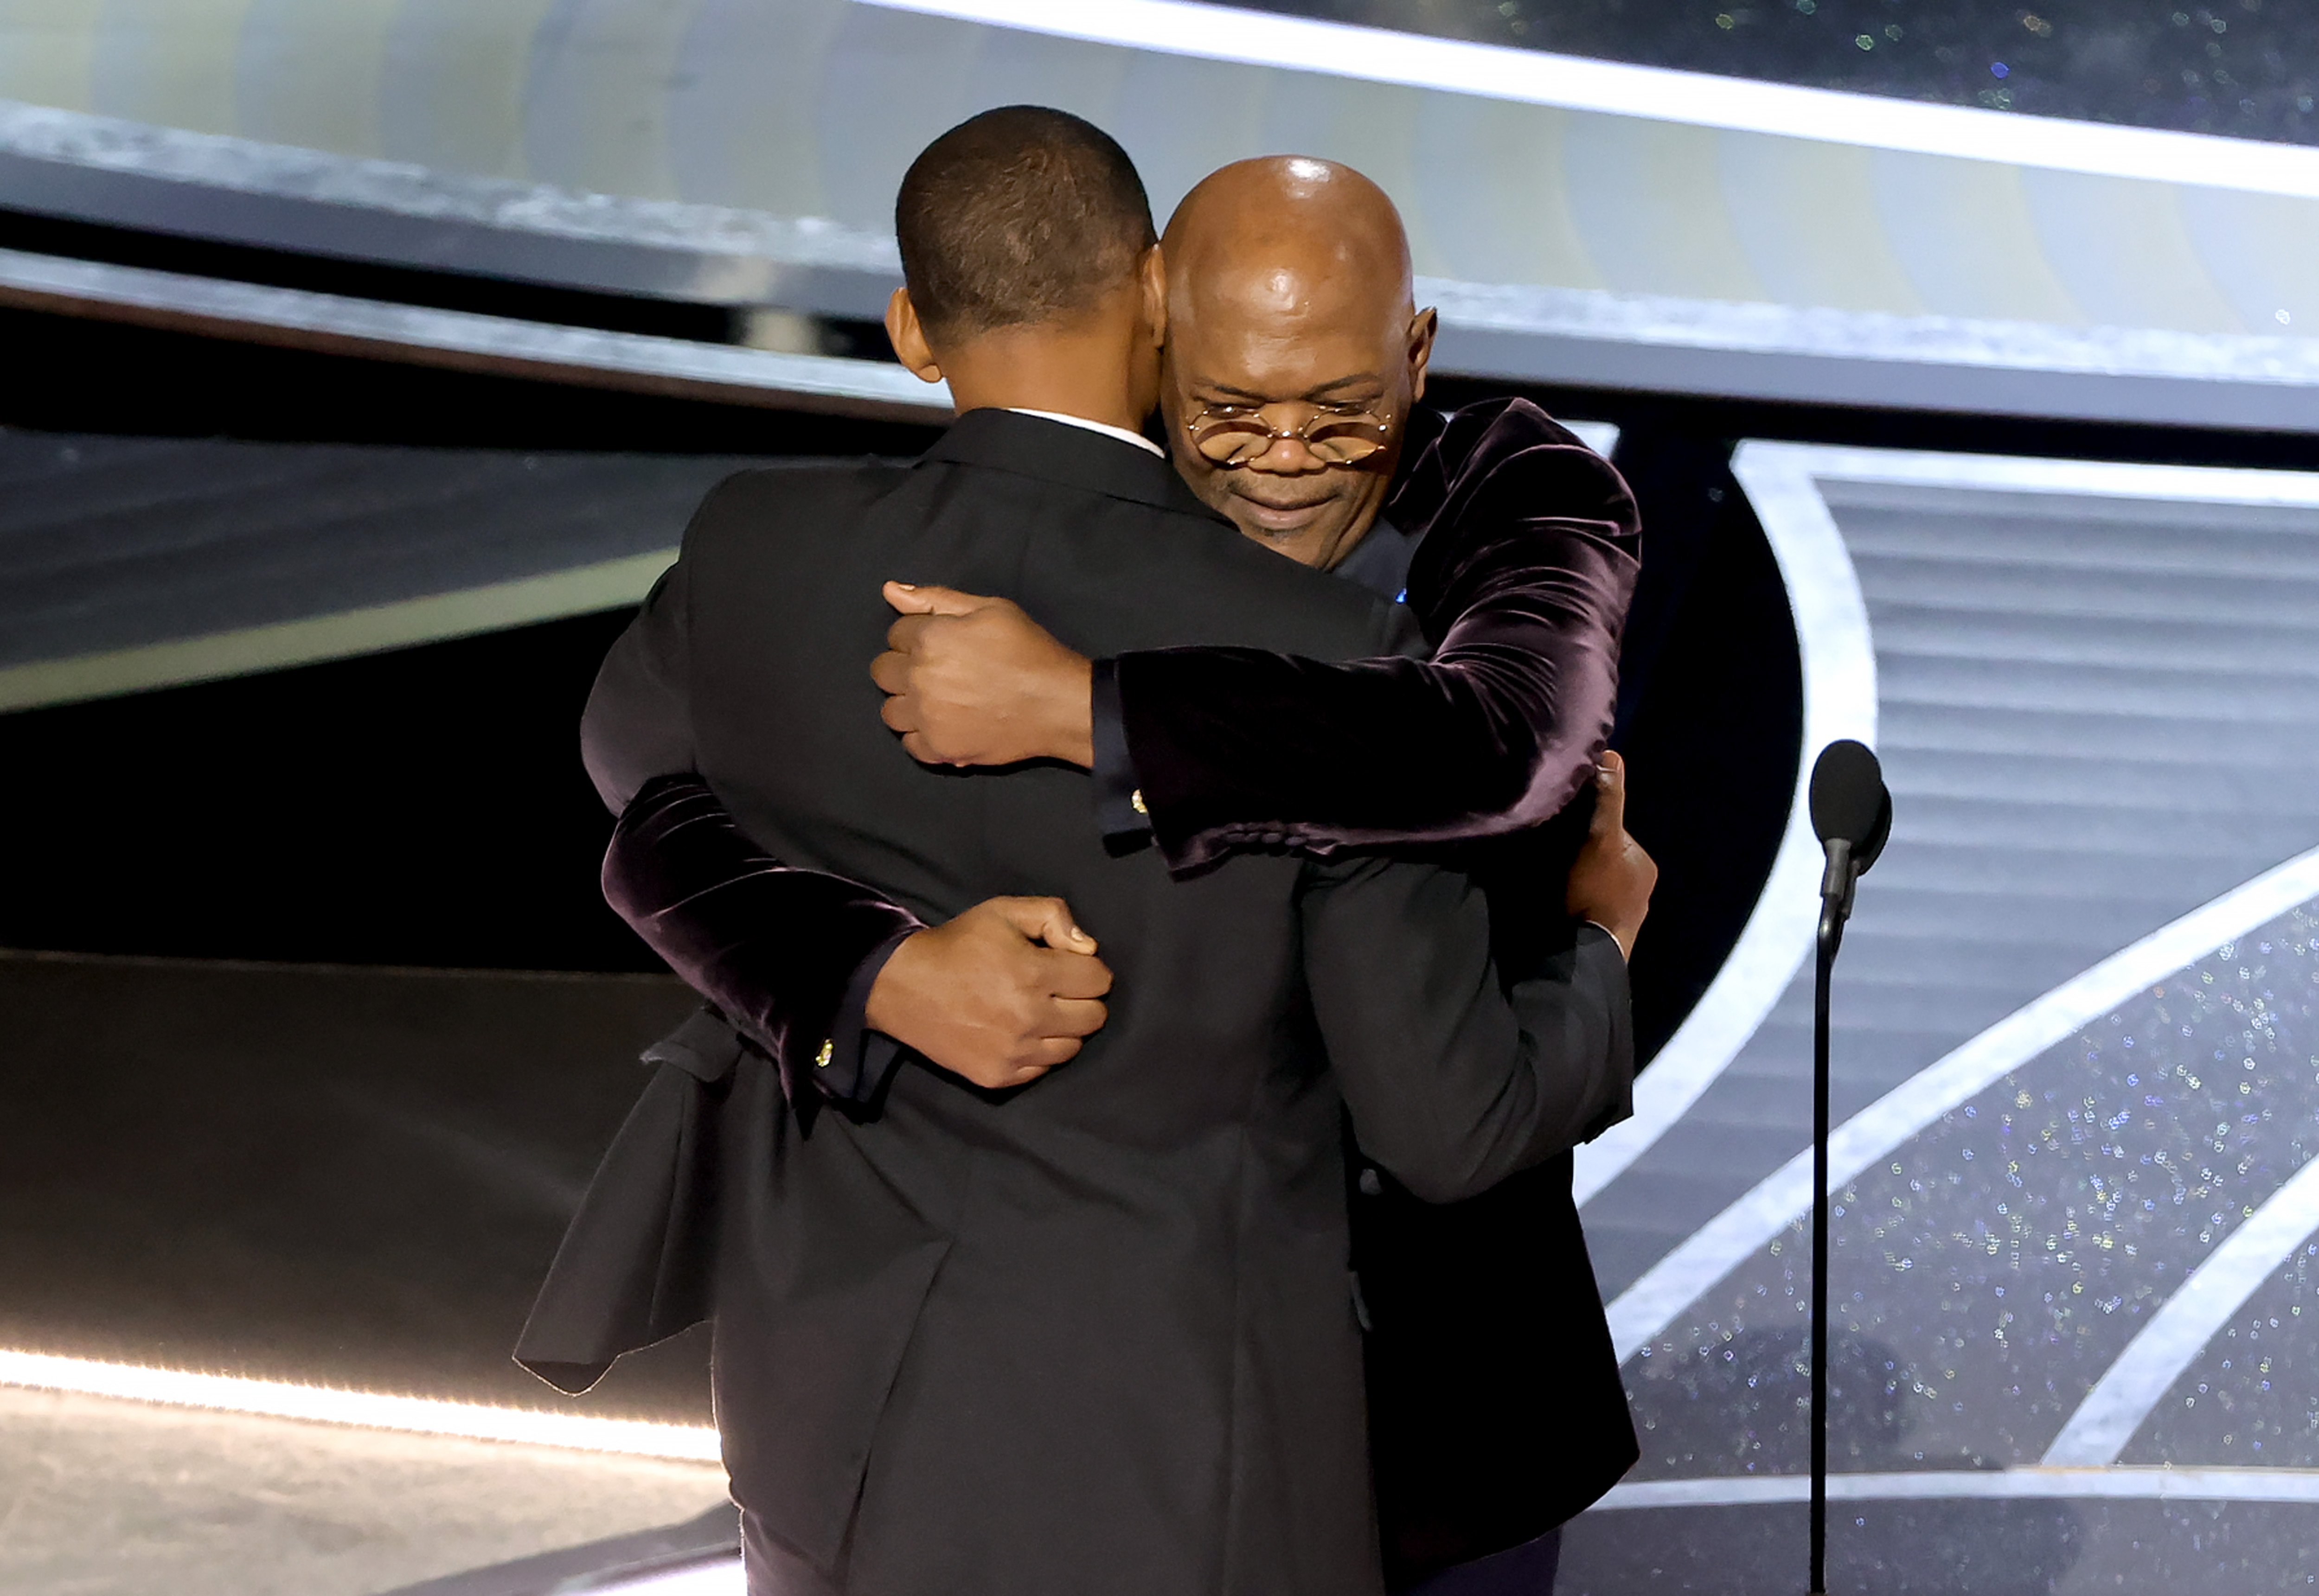 Will Smith accepts the Academy Award for Best Actor at the 2022 Oscars, given to him by Samuel L. Jackson